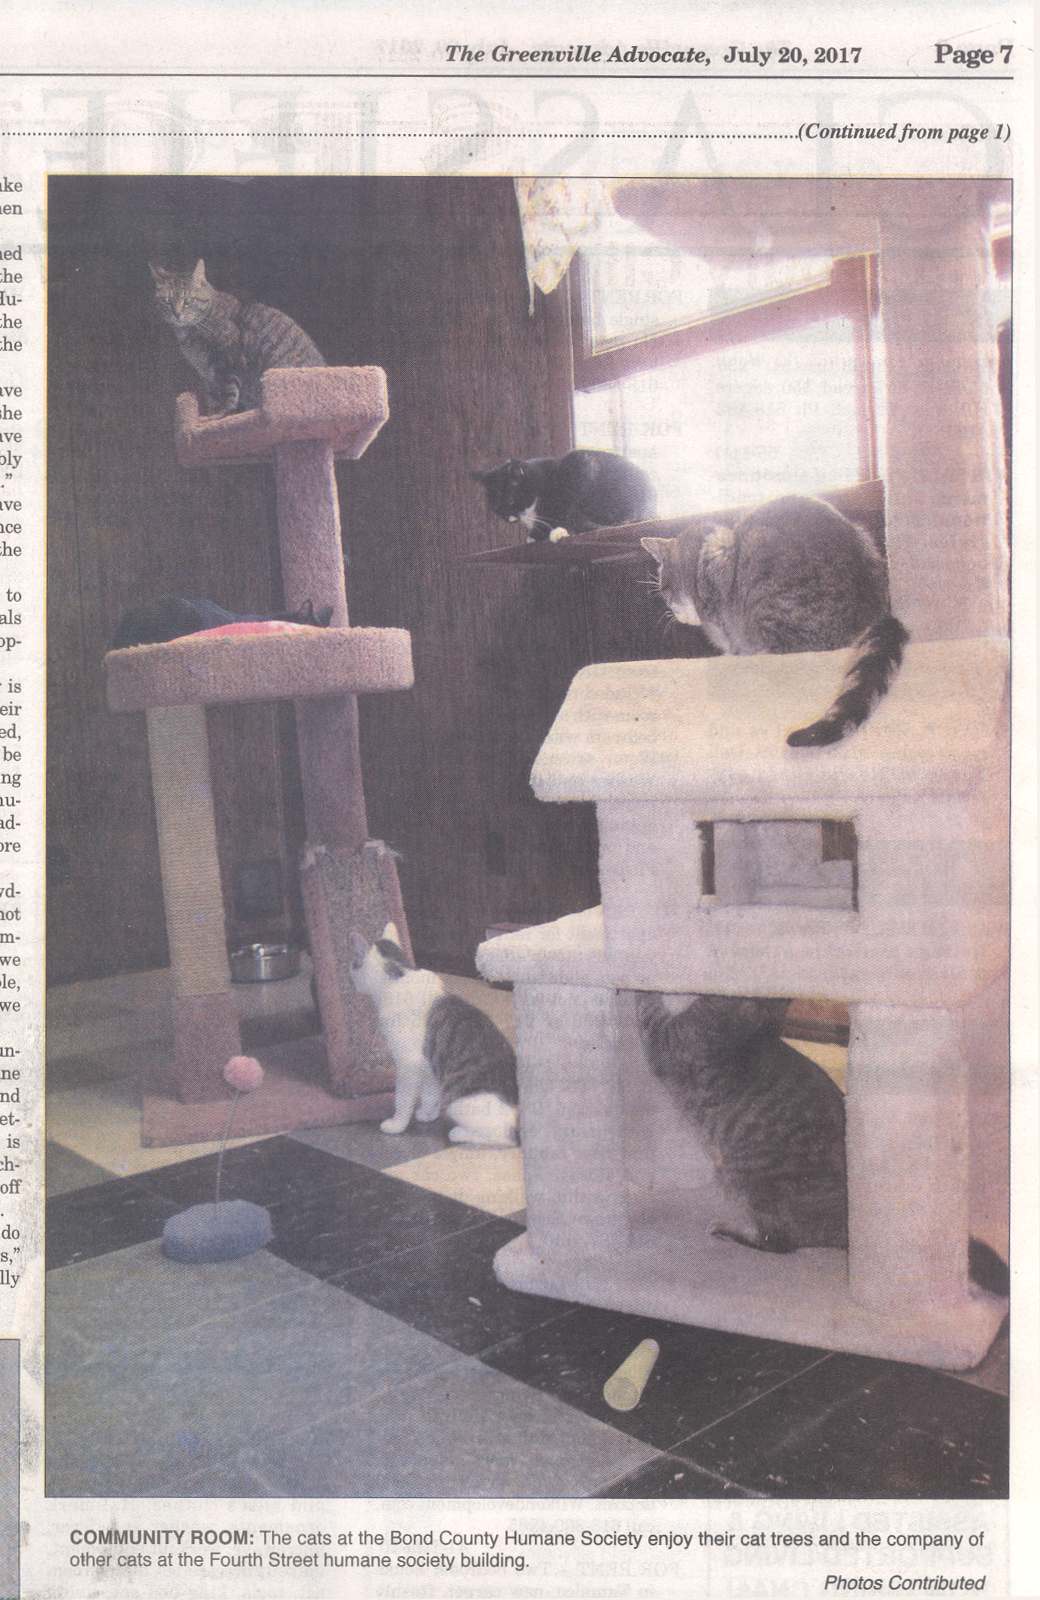 Adoptable cats hanging out on window sill and on cat trees